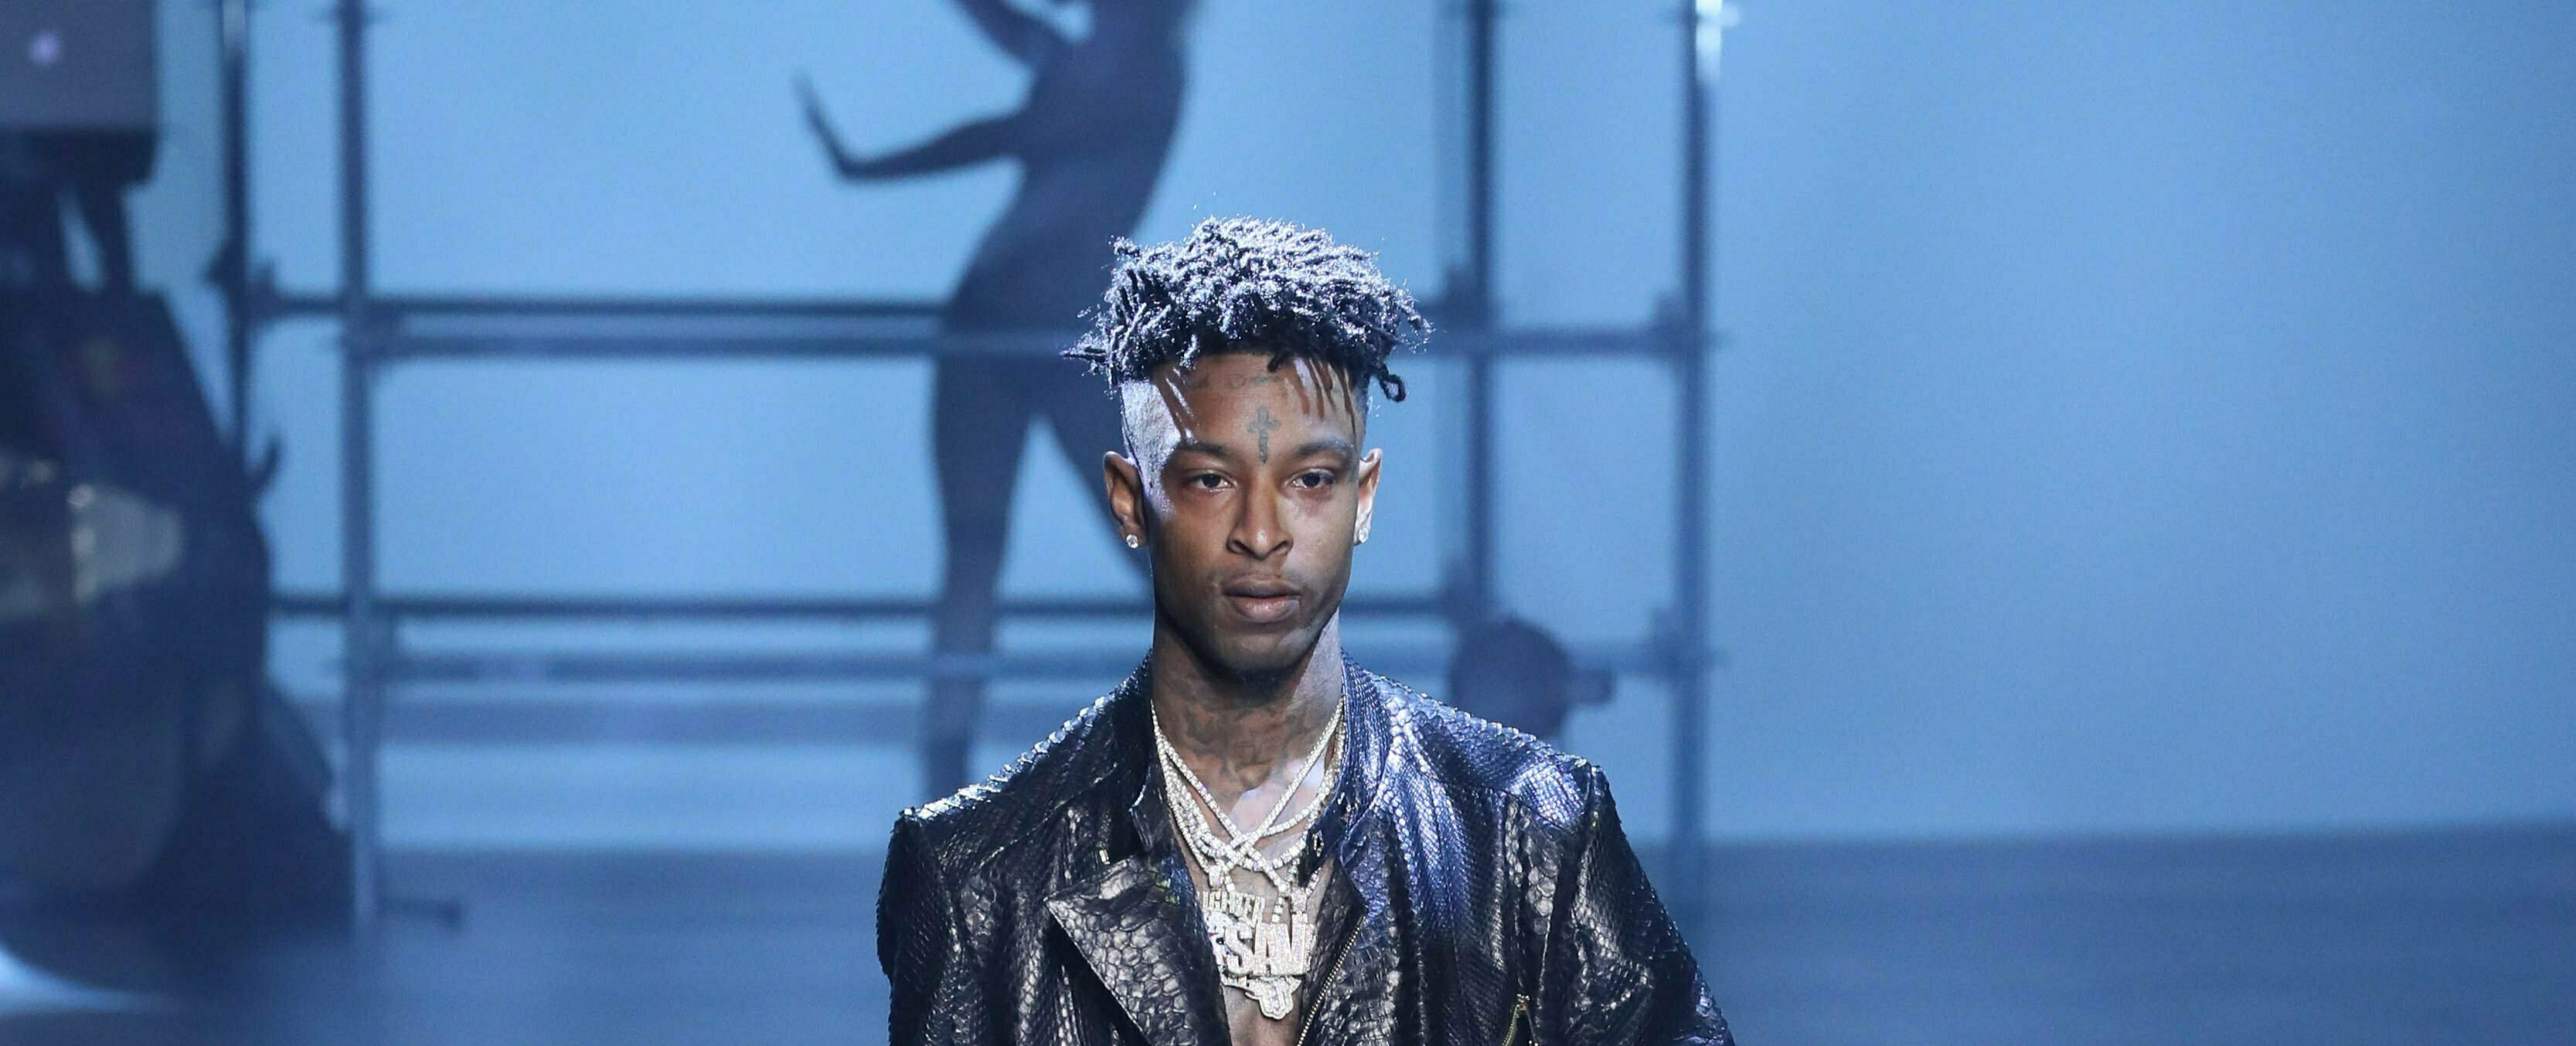 21 Savage arrested by immigration officials.